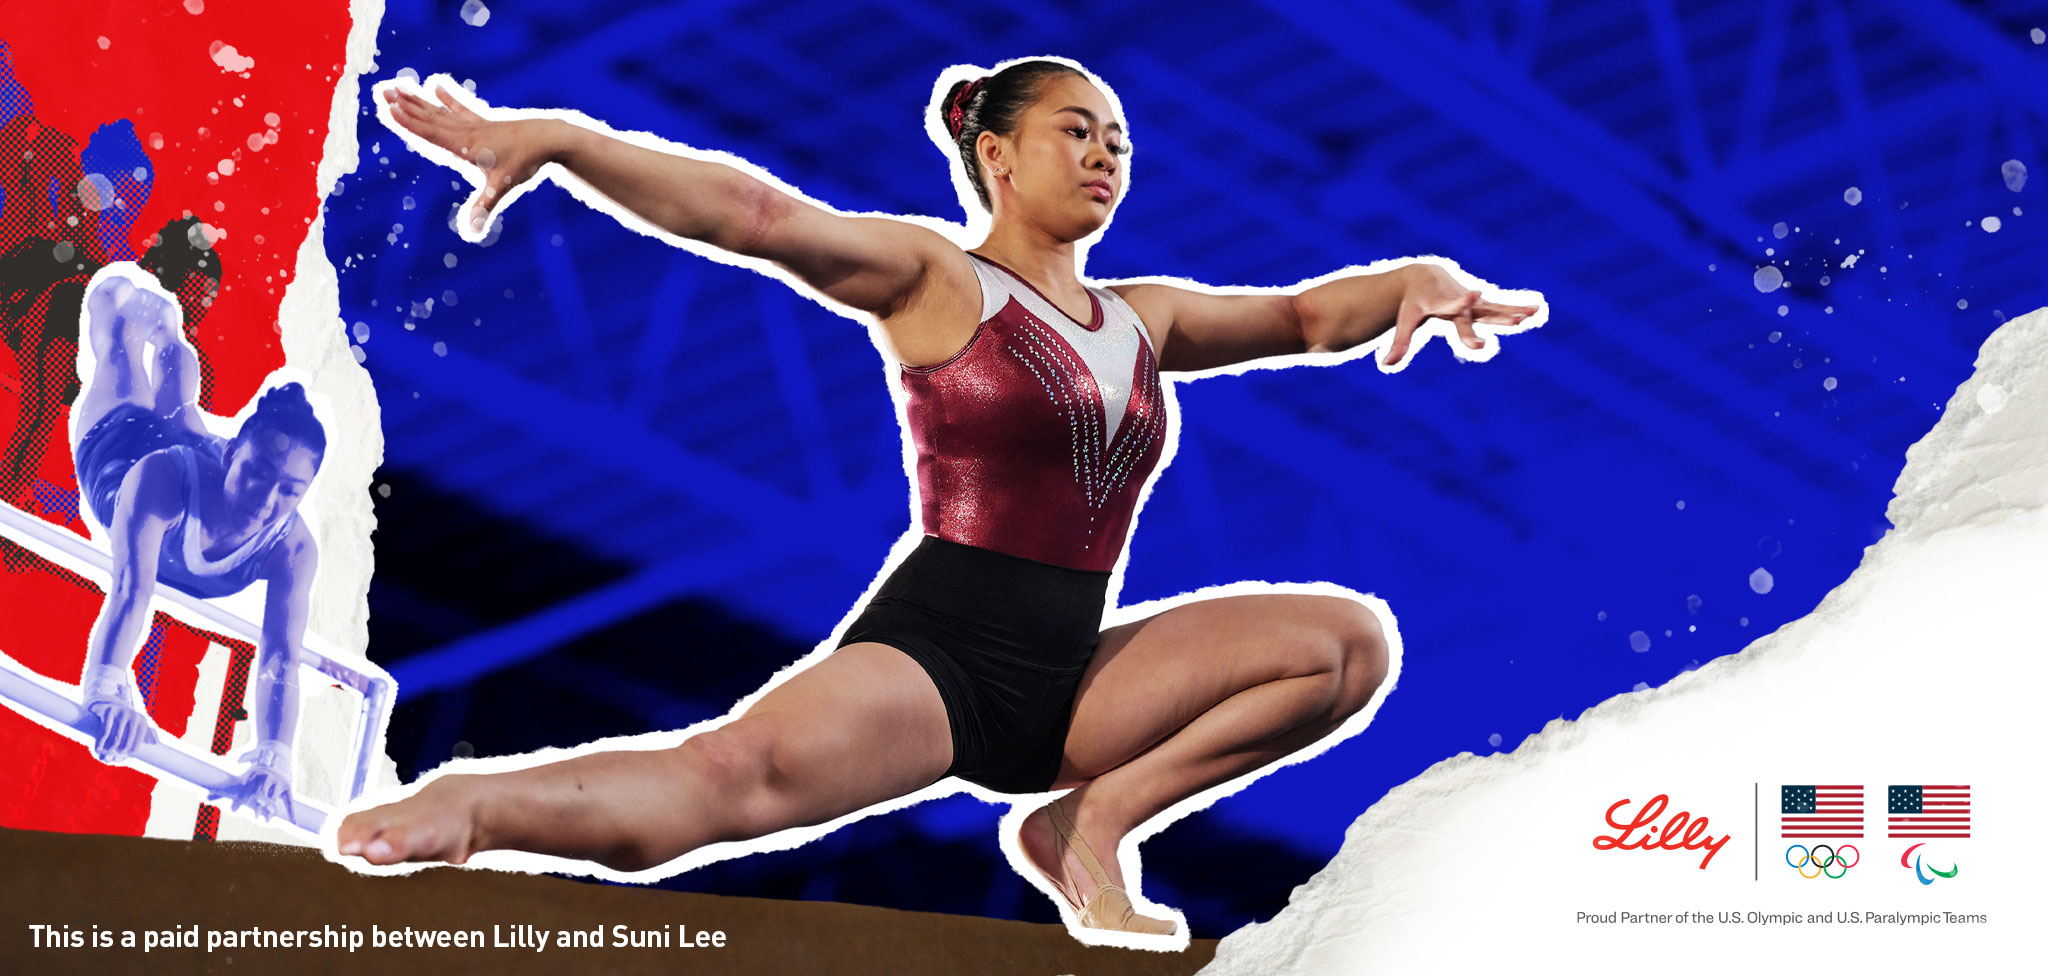 Suni Lee on balance beam with the Lilly and U.S. Olympic and U.S. Paralympic Teams logos